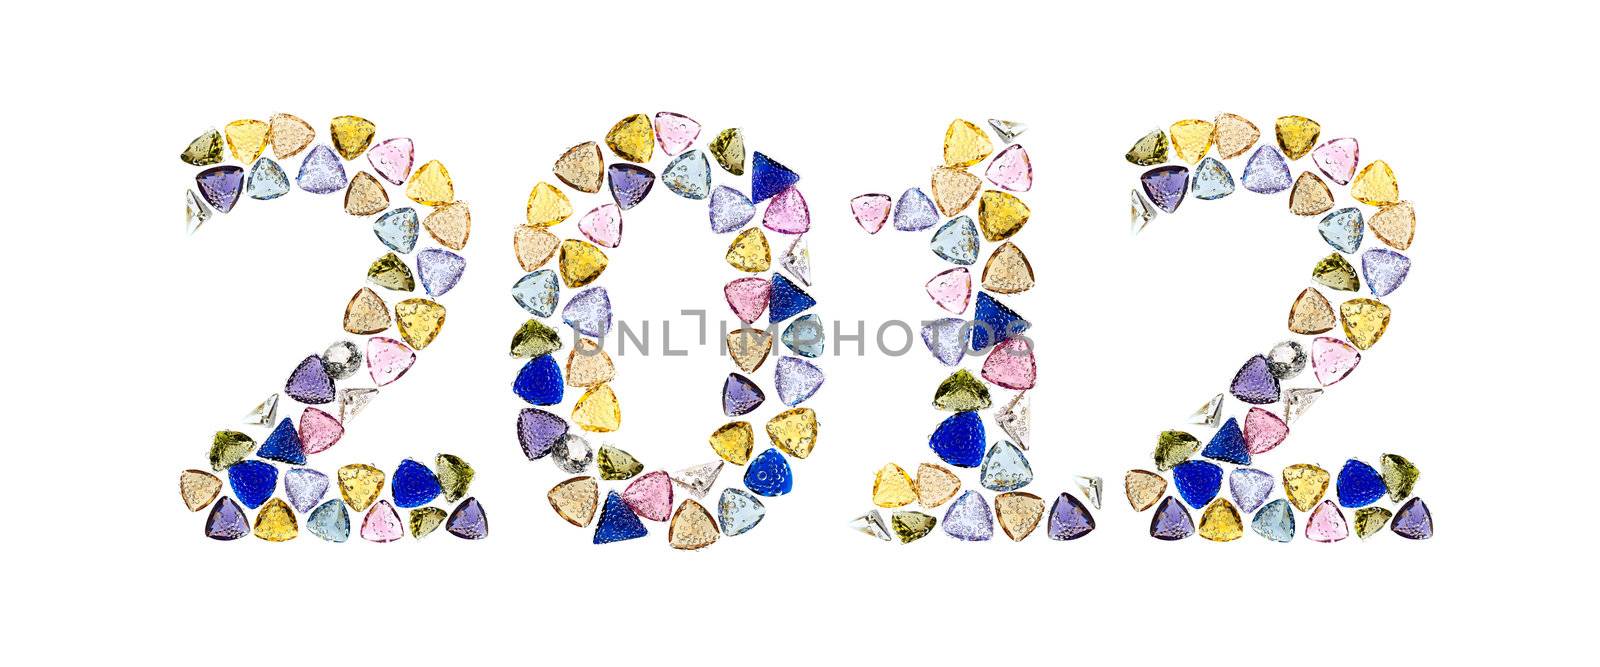 Gemstones numbers 2012, means Happy New Year. Isolated on white background.